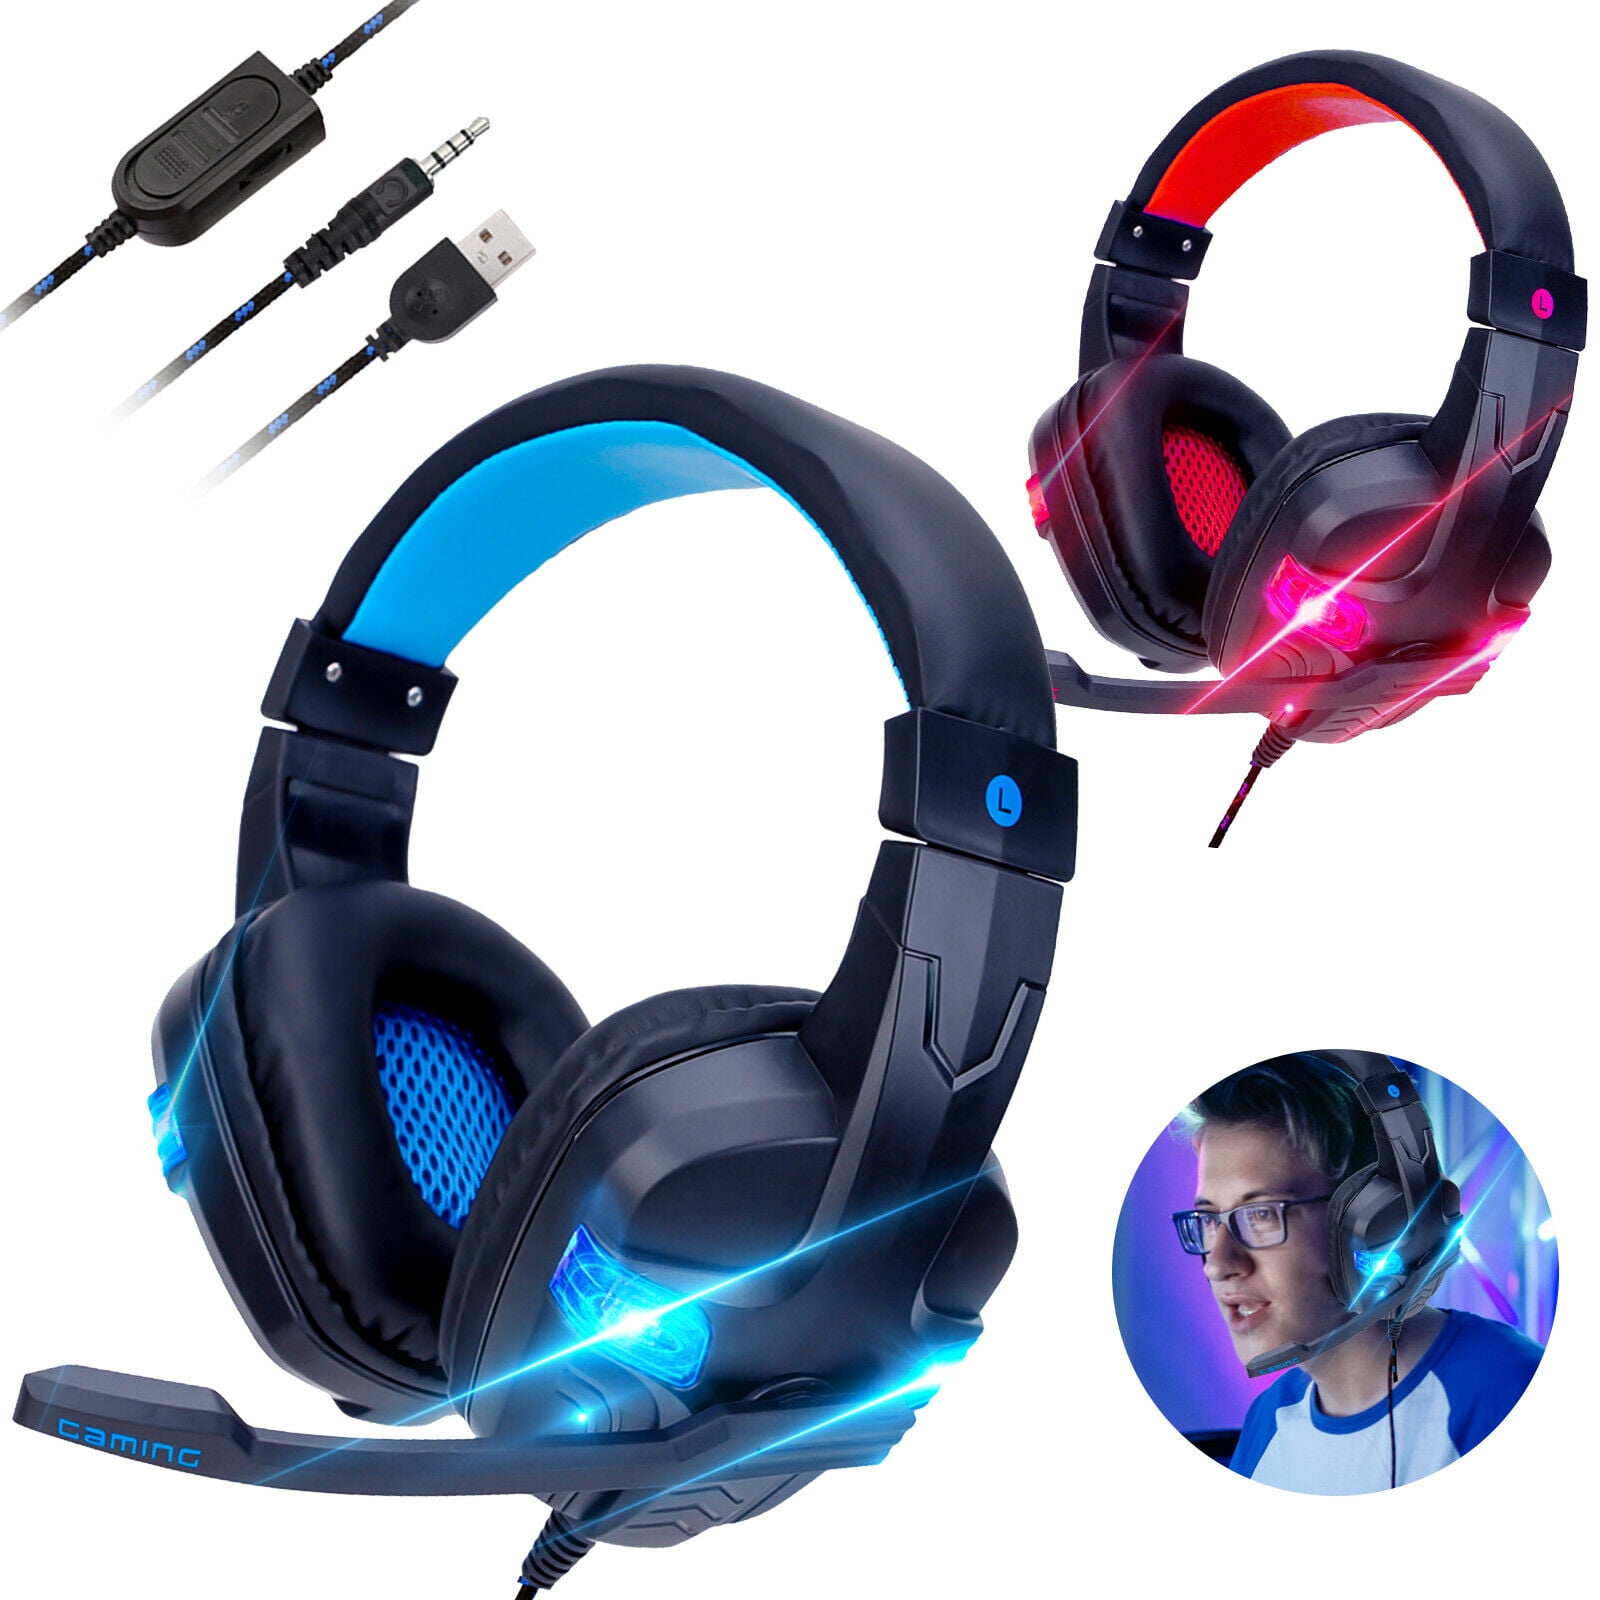 Pacrate Stereo Gaming Headset for PS4 Xbox One PC with Noise Cancelling Mic 